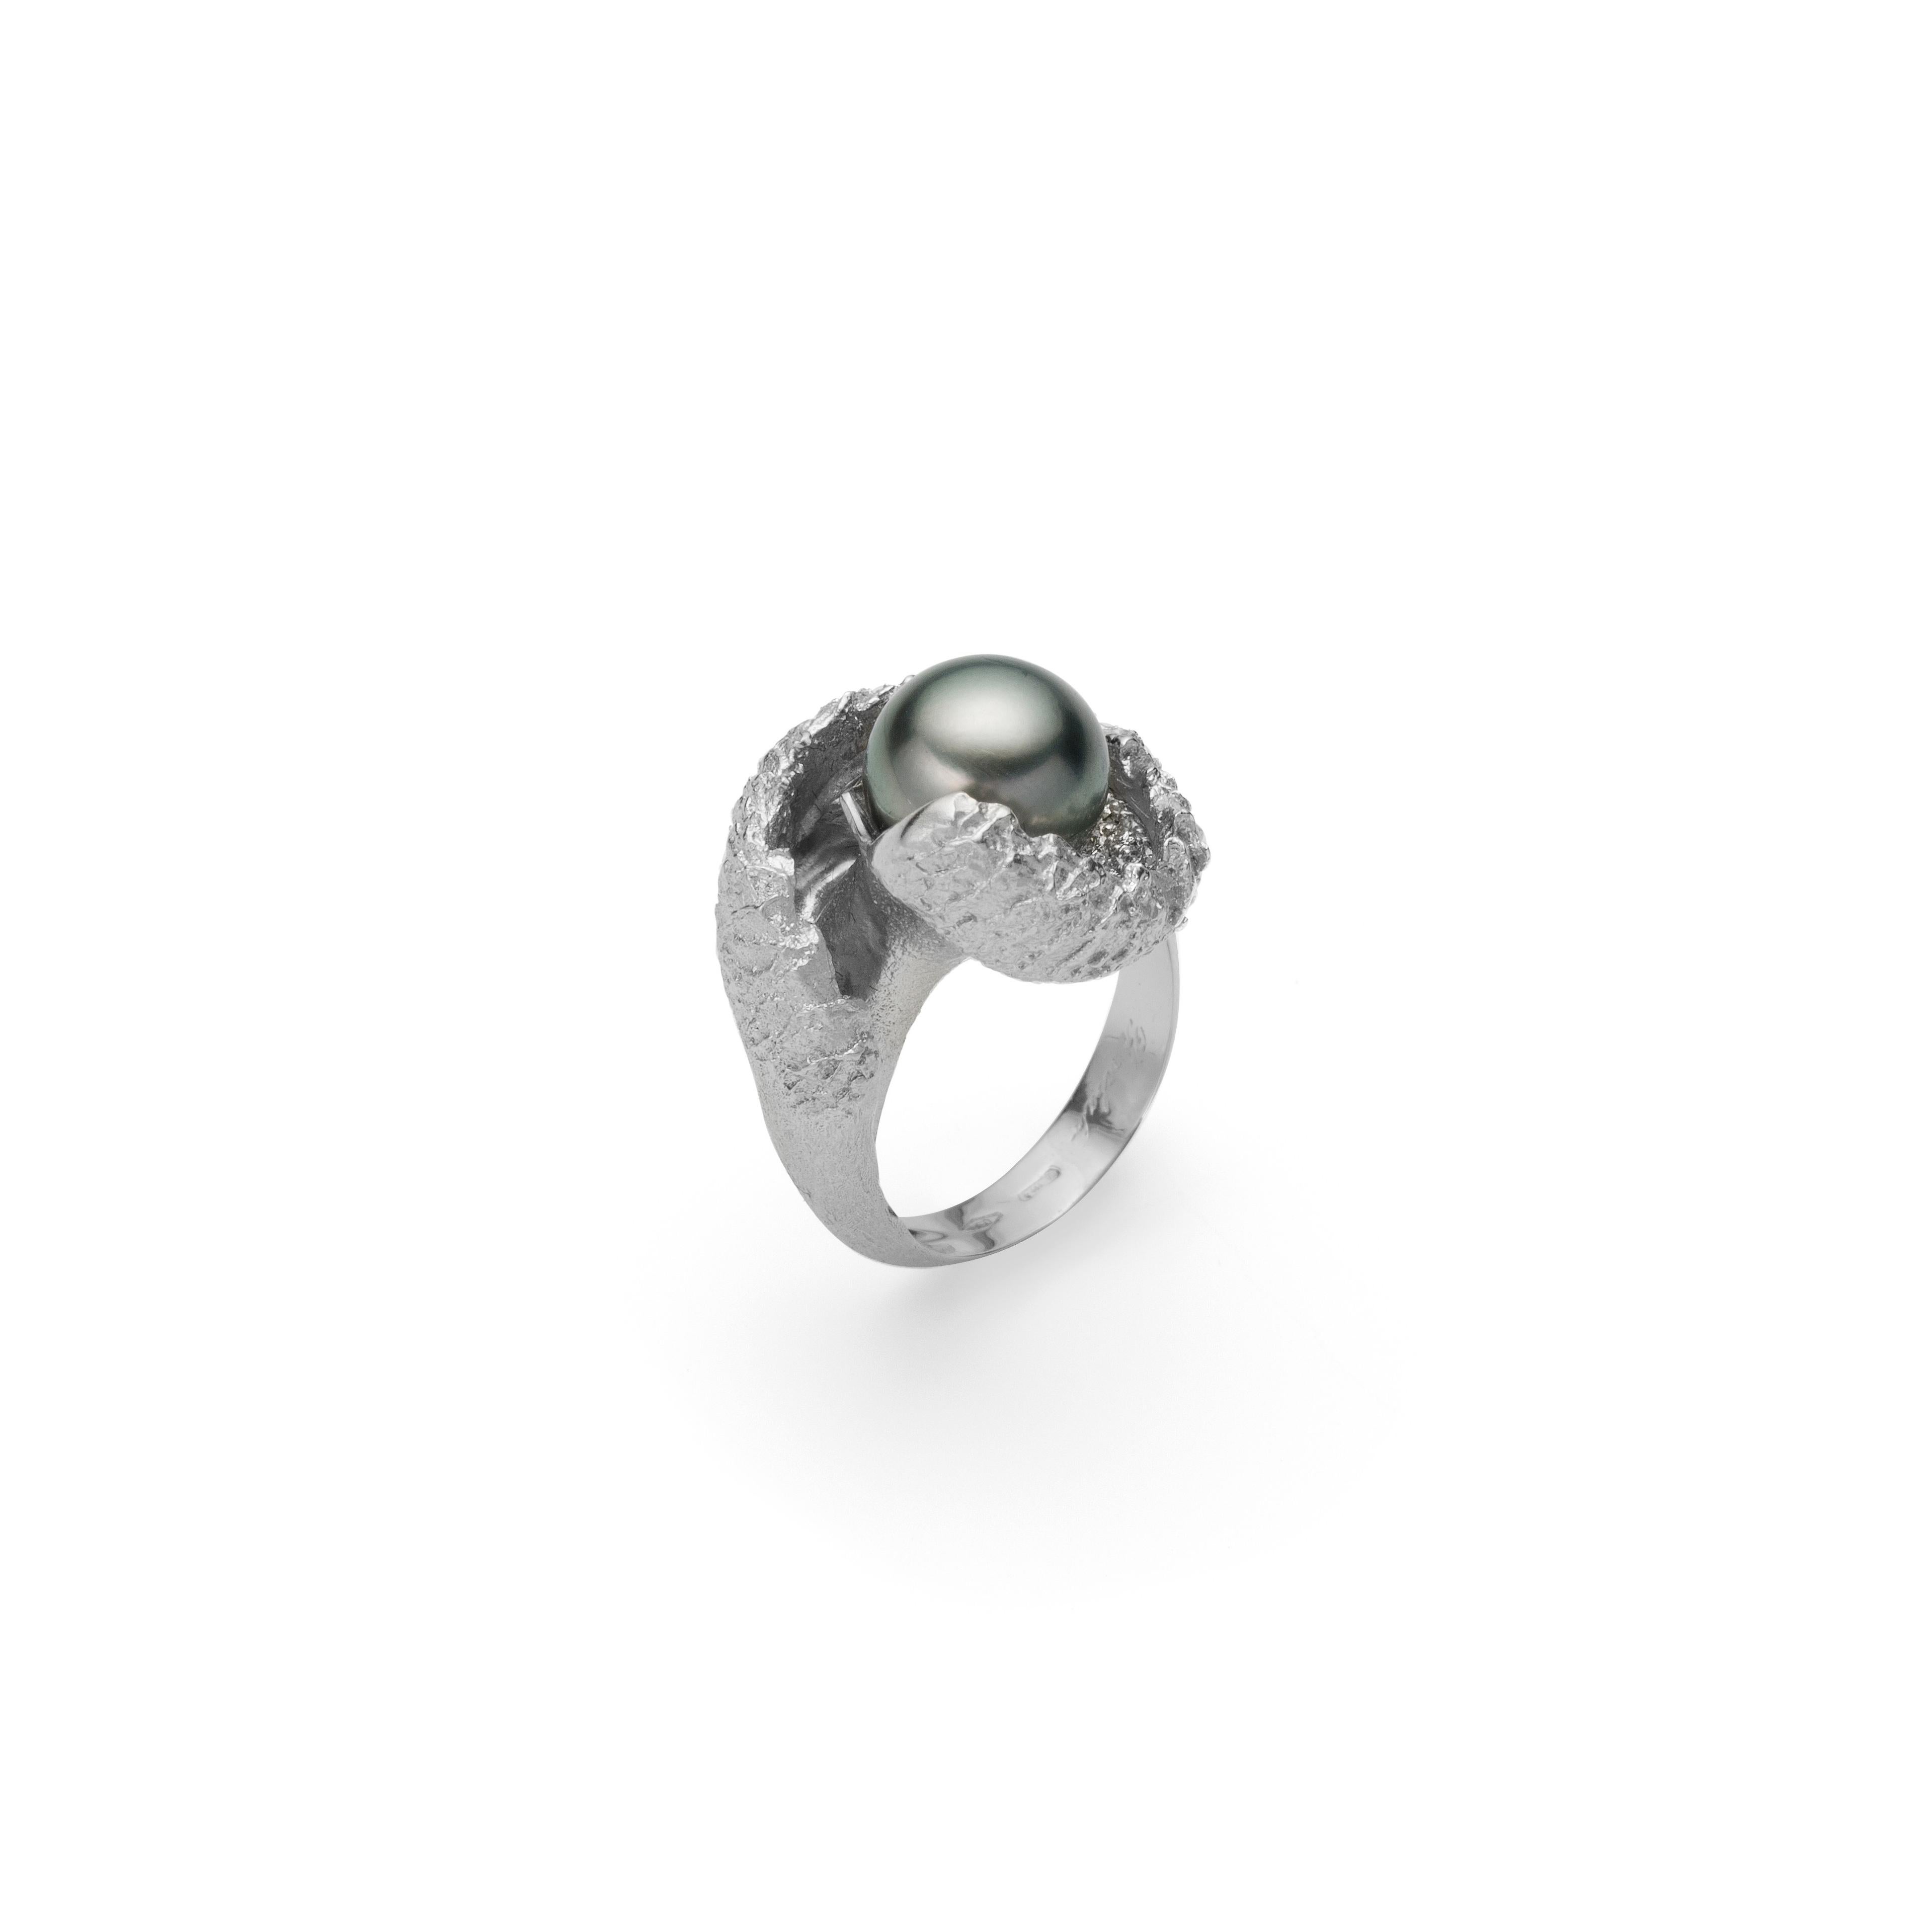 Unique in its design, this alluring ring is handcrafted in 18Kt white gold and features a black Tahiti pearl at the center. This ring is inspired by Mediterranean cliffs kissed by the moonlight. The conceptual idea behind this original design is